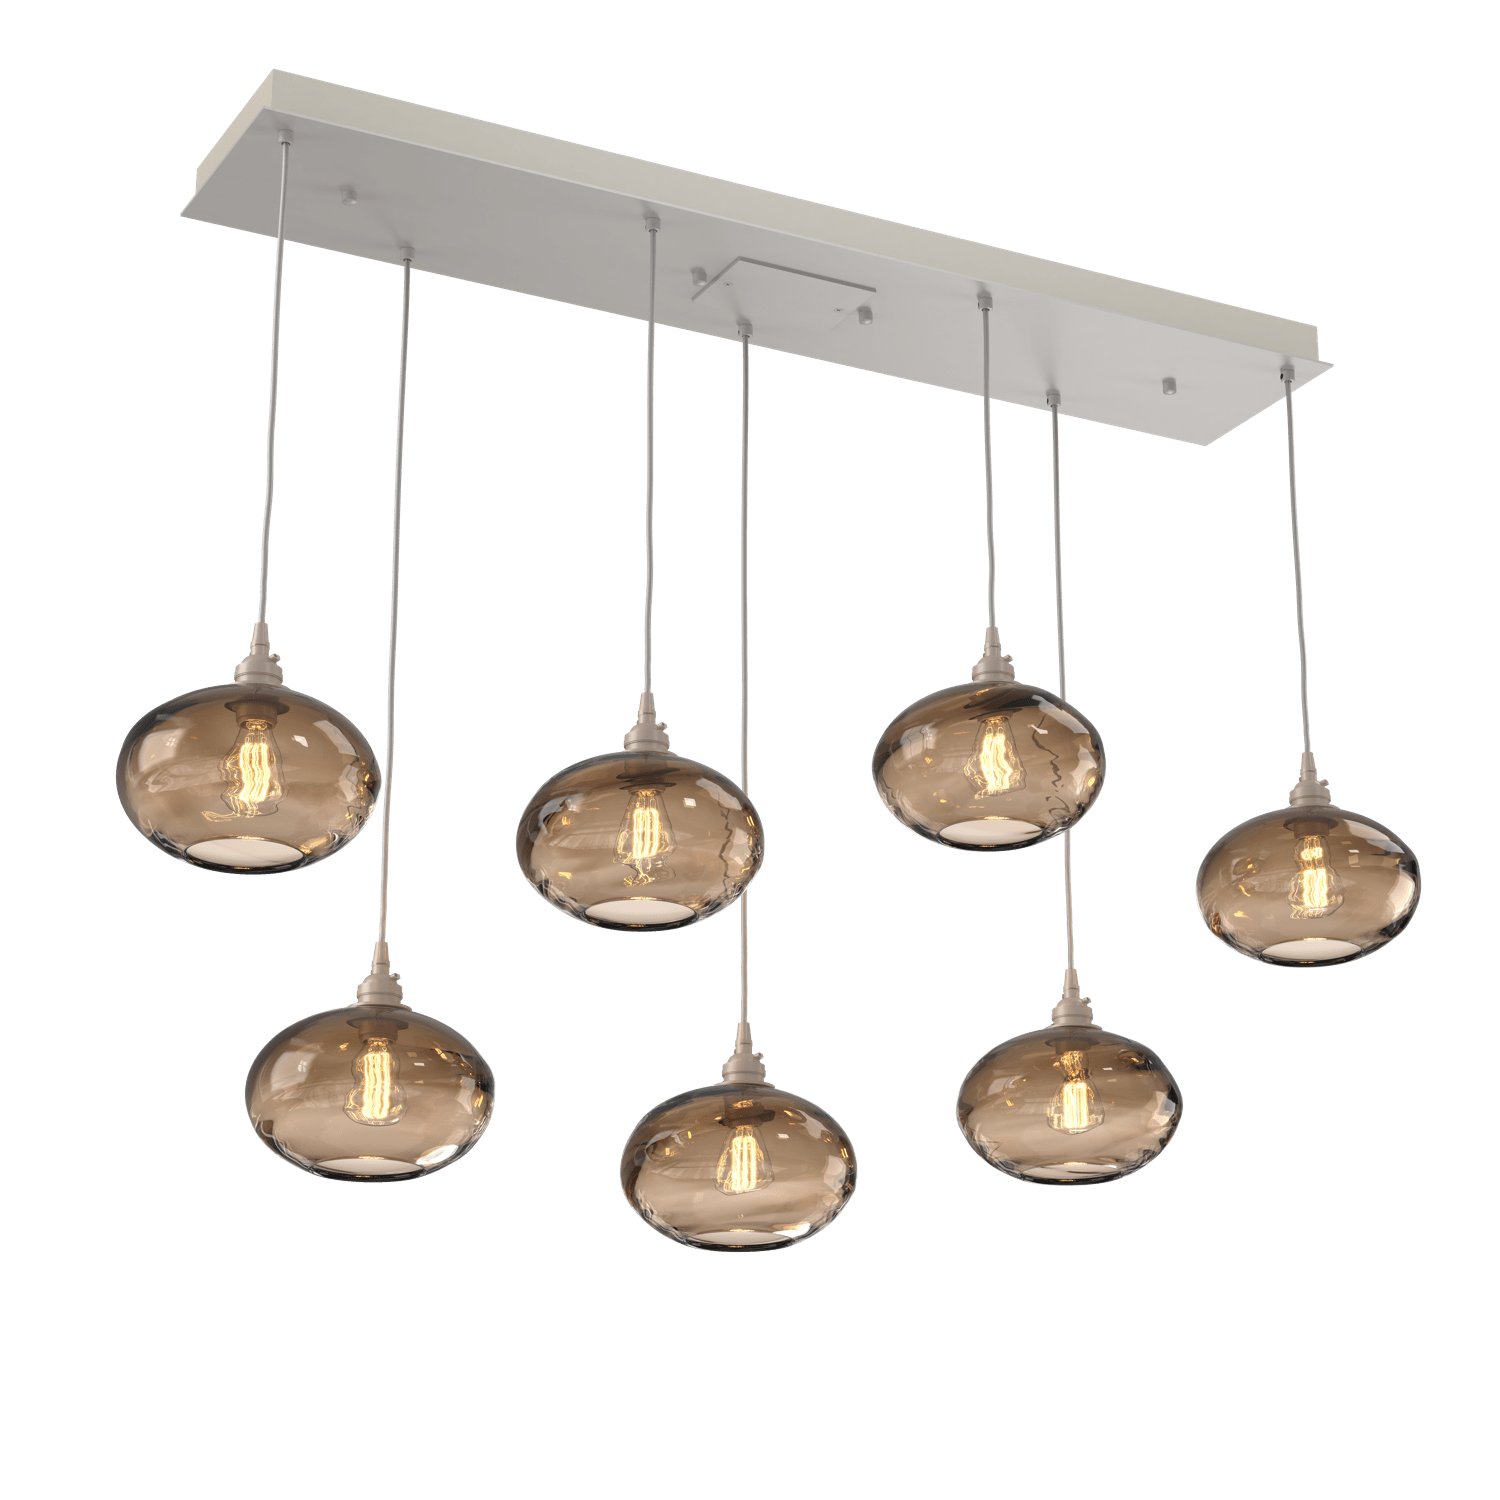 PLB0036-07-BS-OB-Hammerton-Studio-Optic-Blown-Glass-Coppa-7-light-linear-pendant-chandelier-with-metallic-beige-silver-finish-and-optic-bronze-blown-glass-shades-and-incandescent-lamping